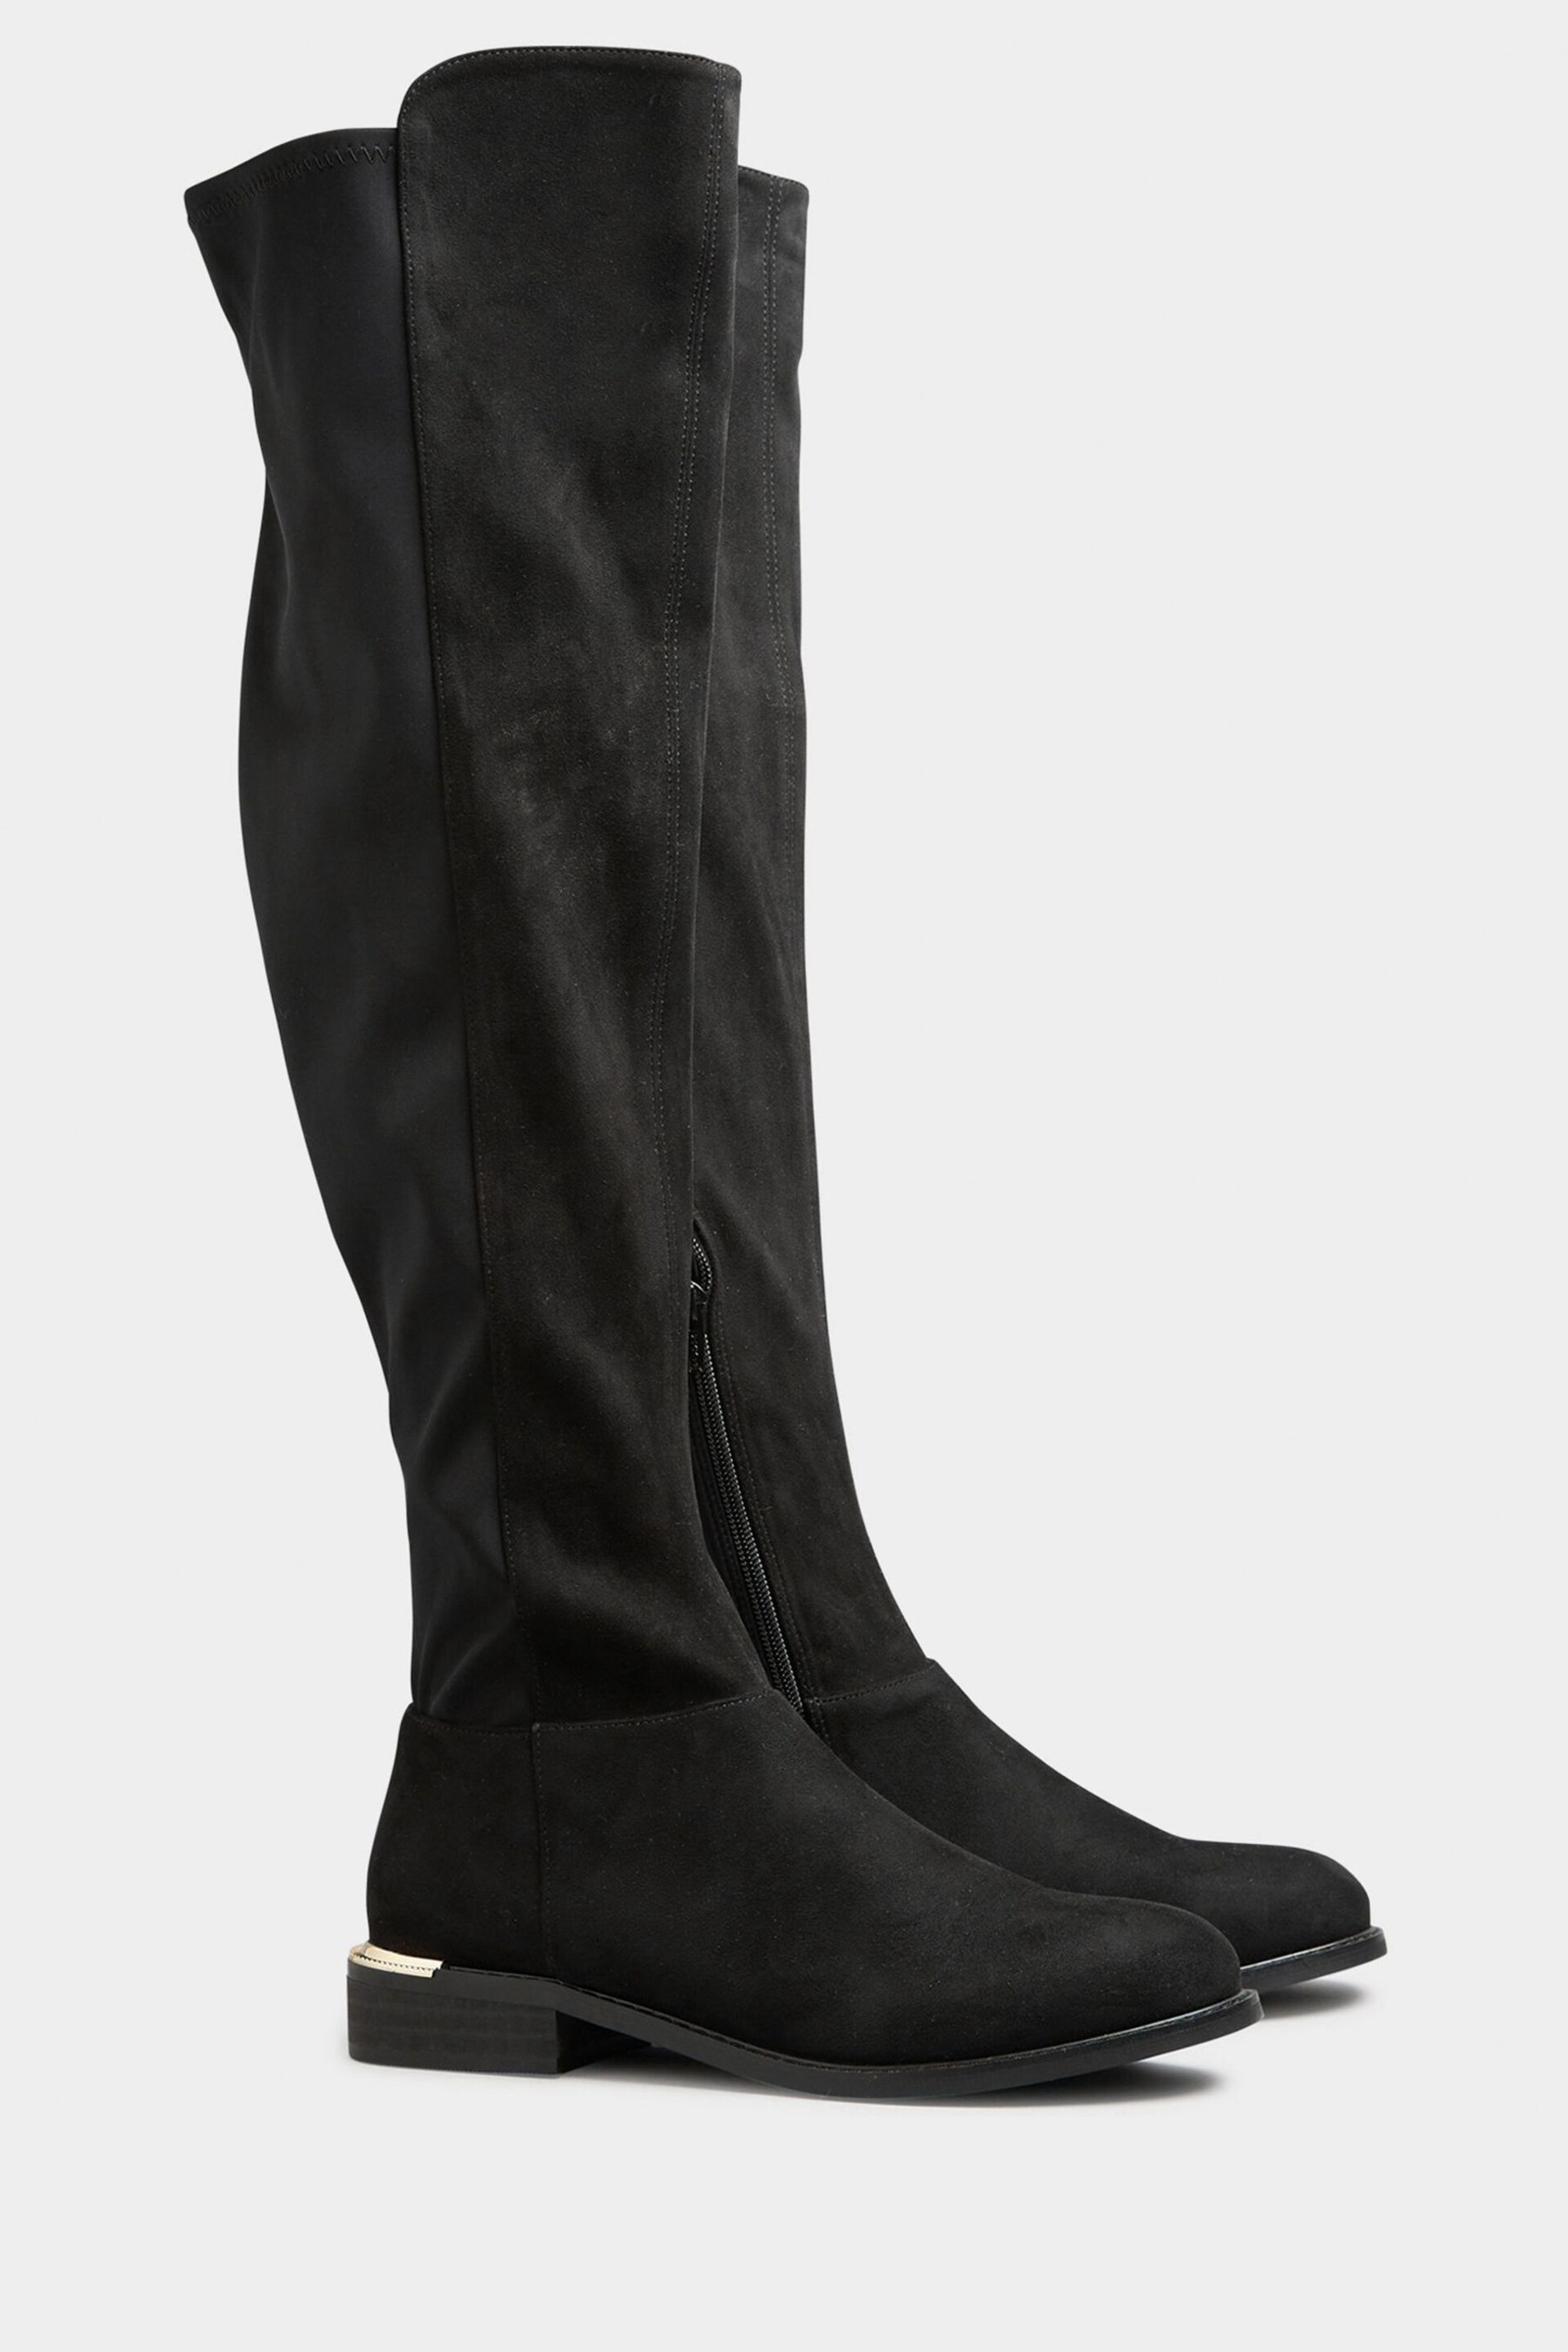 Long Tall Sally Black Stretch Boots - Image 2 of 4